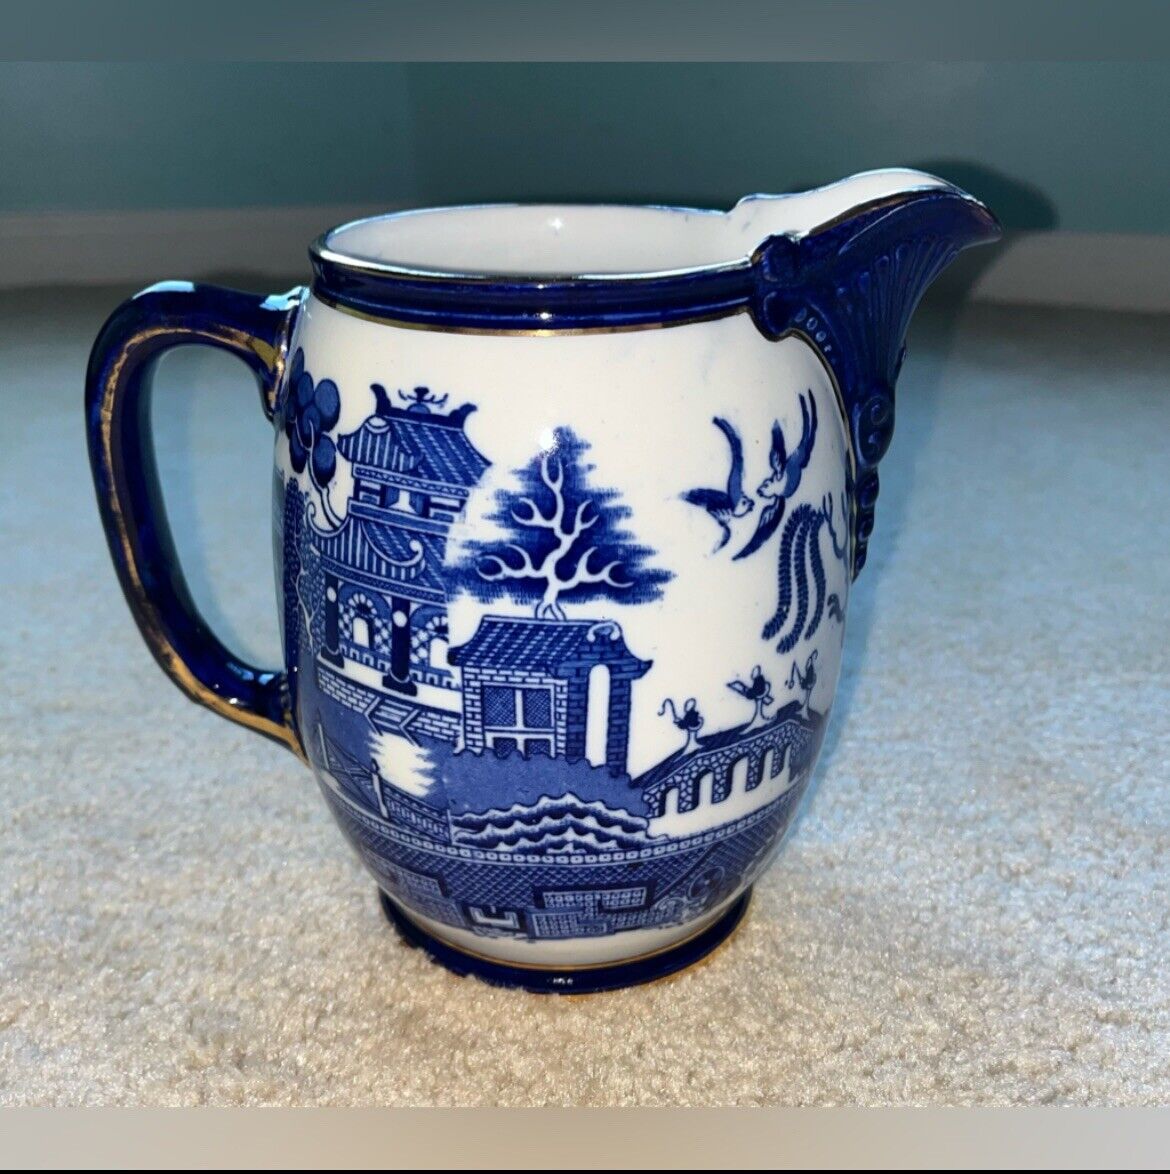 Antique Royal Doulton England Blue Willow 6” Ewer-Pitcher - No Chips Or Cracks